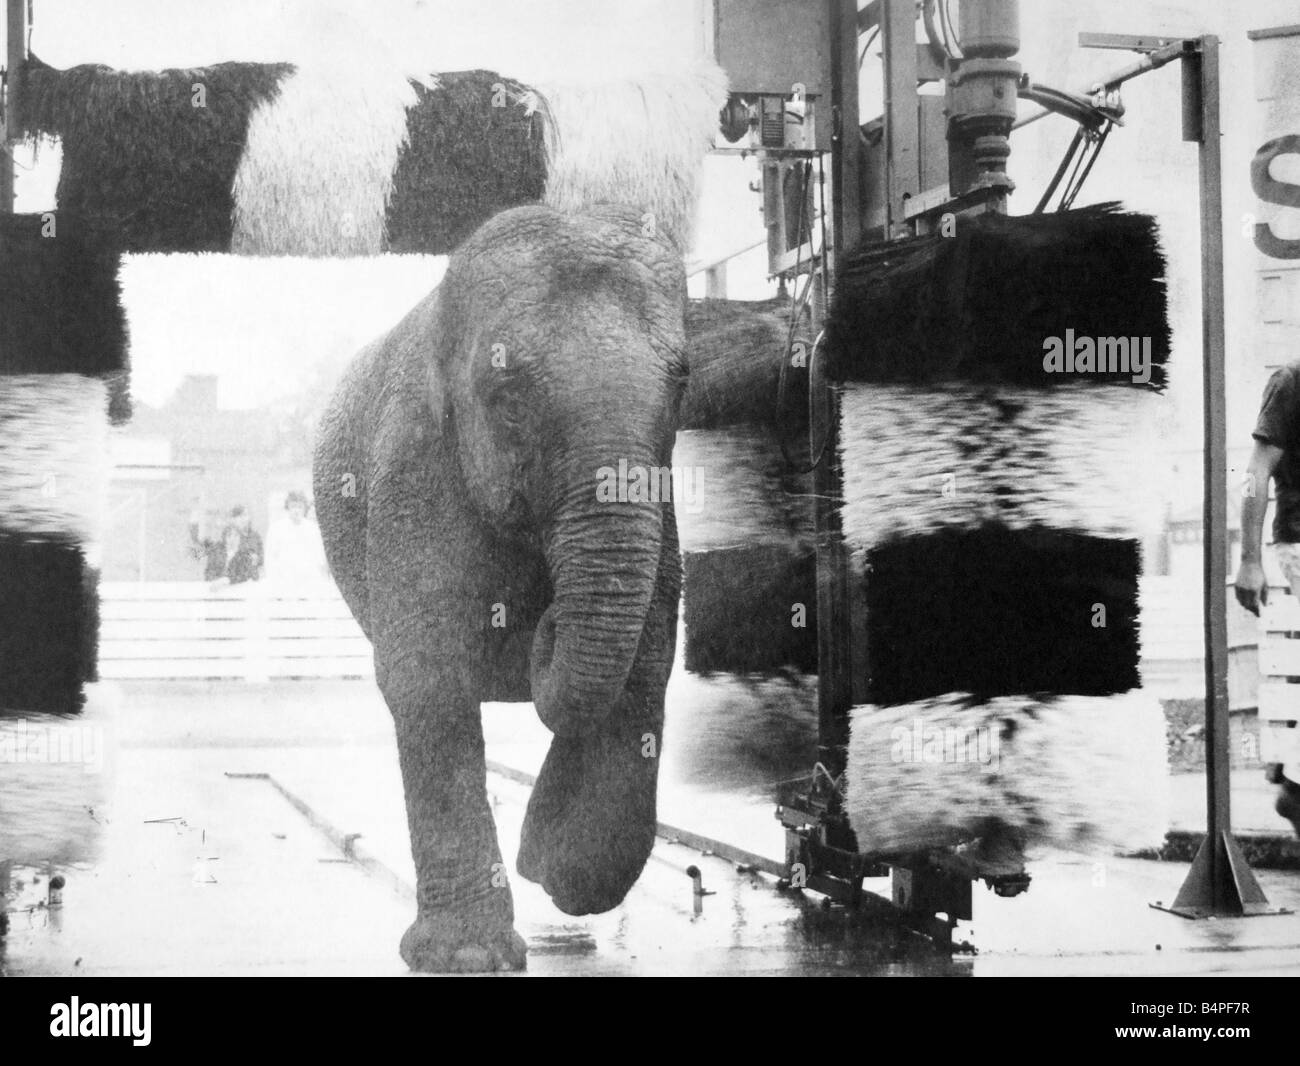 Walsall Football Club s car wash became a Jumbo Jet for a time today Gilda a 2 year old circus elephant took a bath in the panda car wash on the forecourt of the Fellows Park Filling Station 1970 Stock Photo